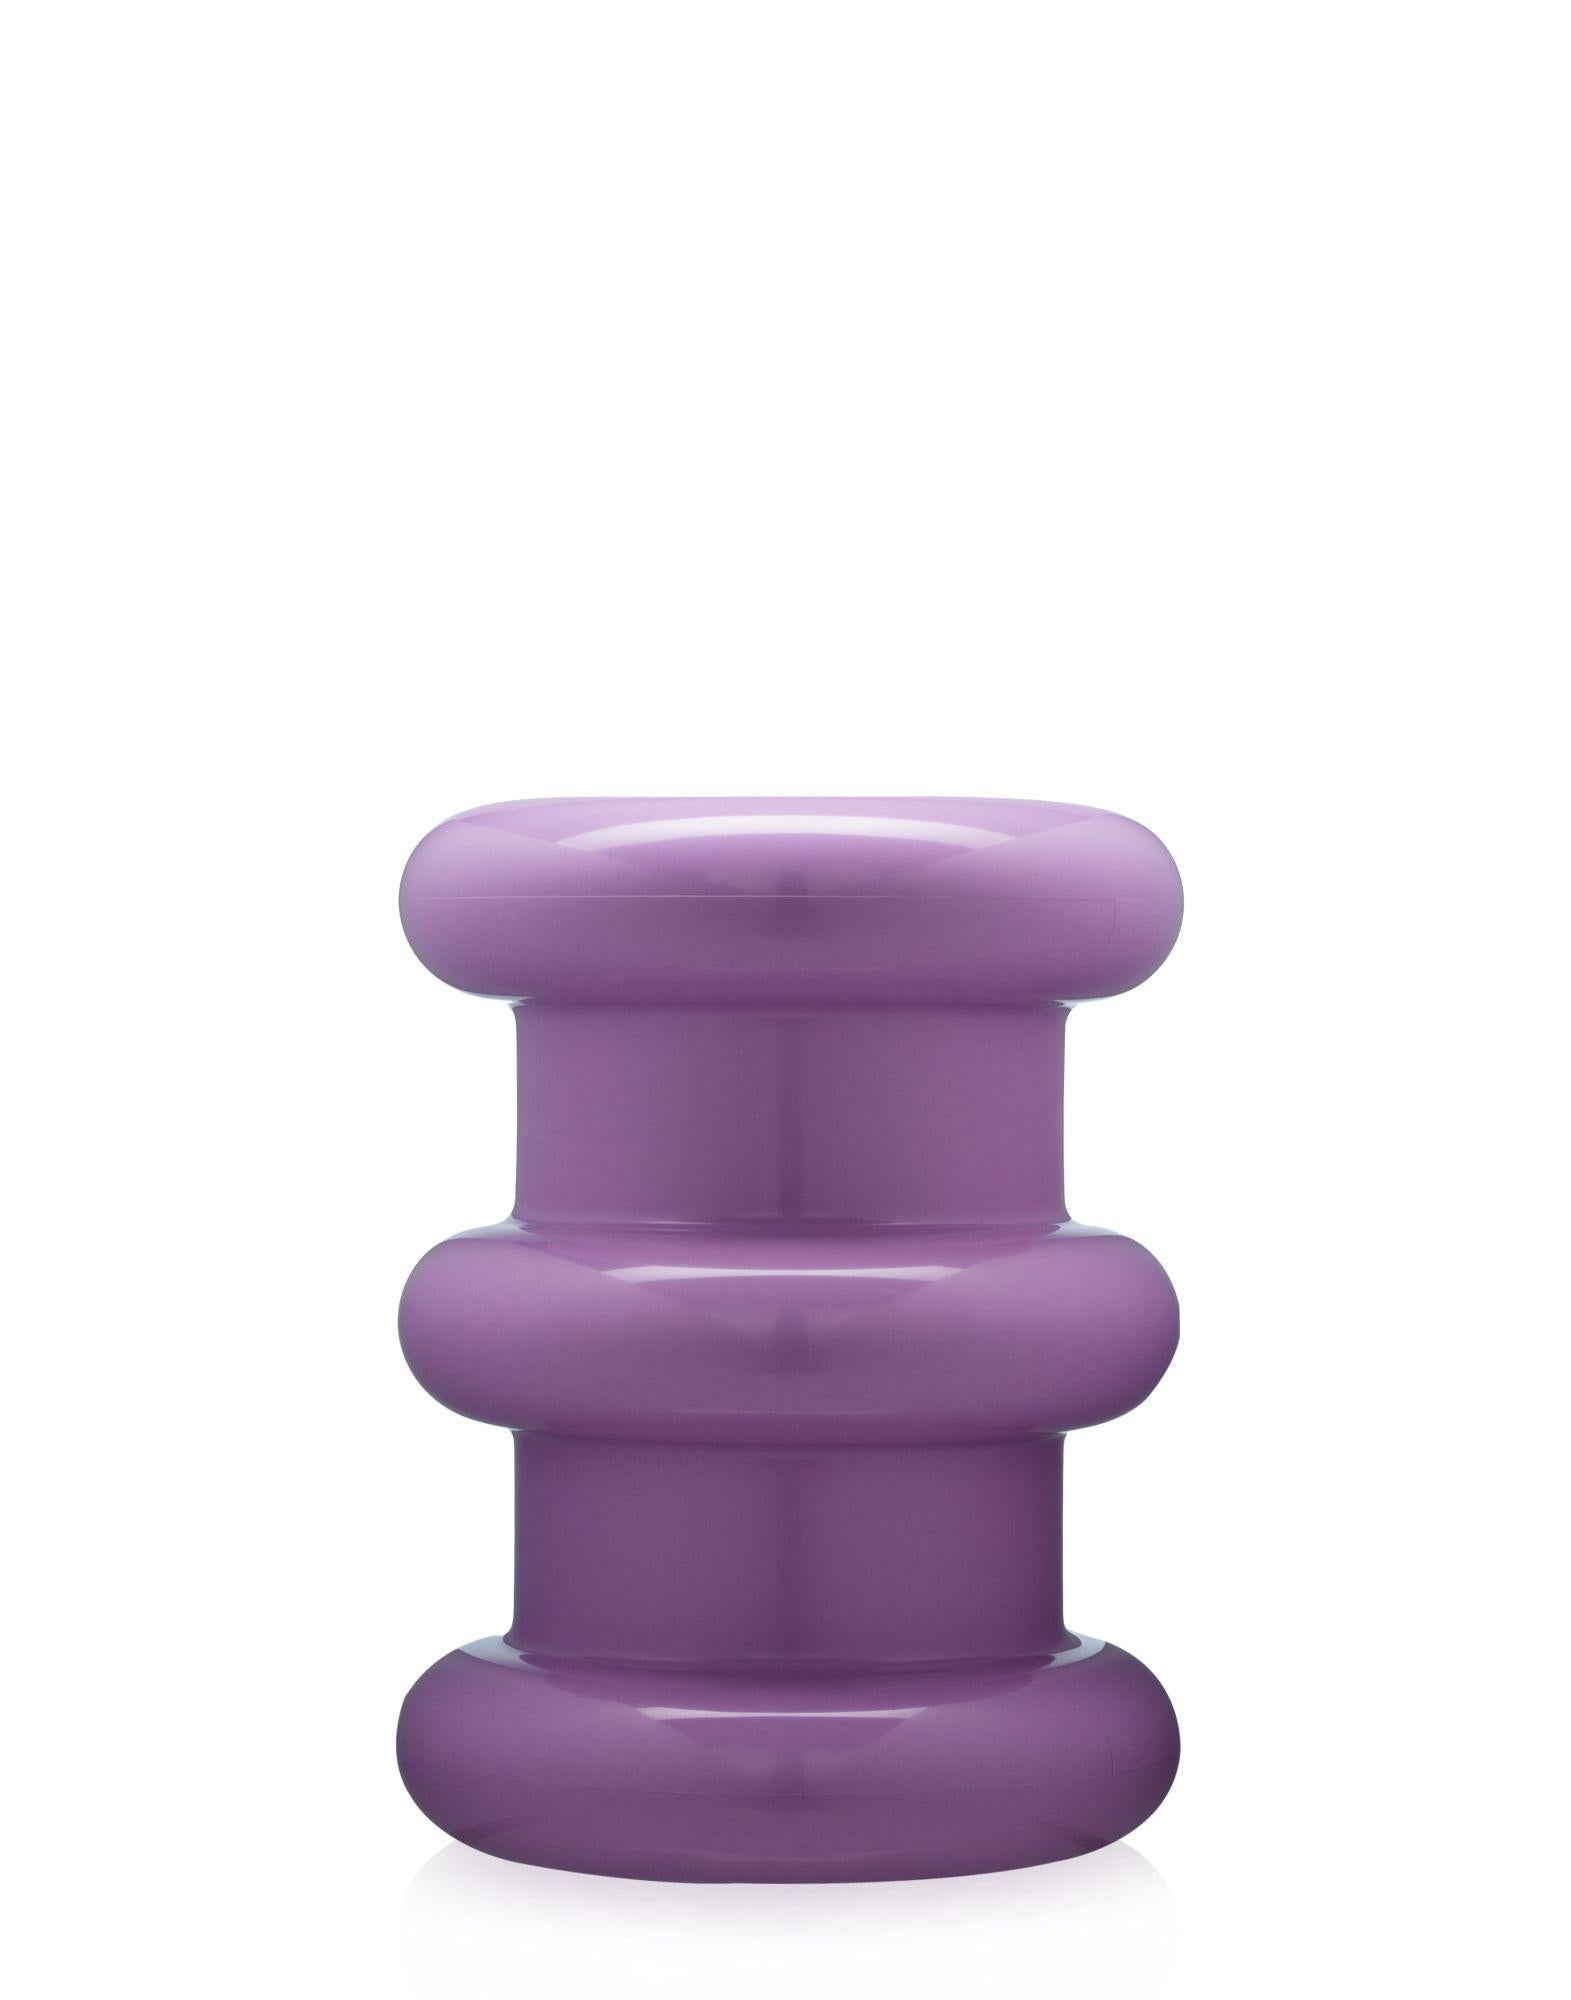 The Pilastro stool is part of the Kartell goes Sottsass - A Tribute to Memphis collection, launched in 2015 in homage to design guru Ettore Sottsass. Pilastro, stands out for its architectural lines and is made from mass-colored thermoplastic